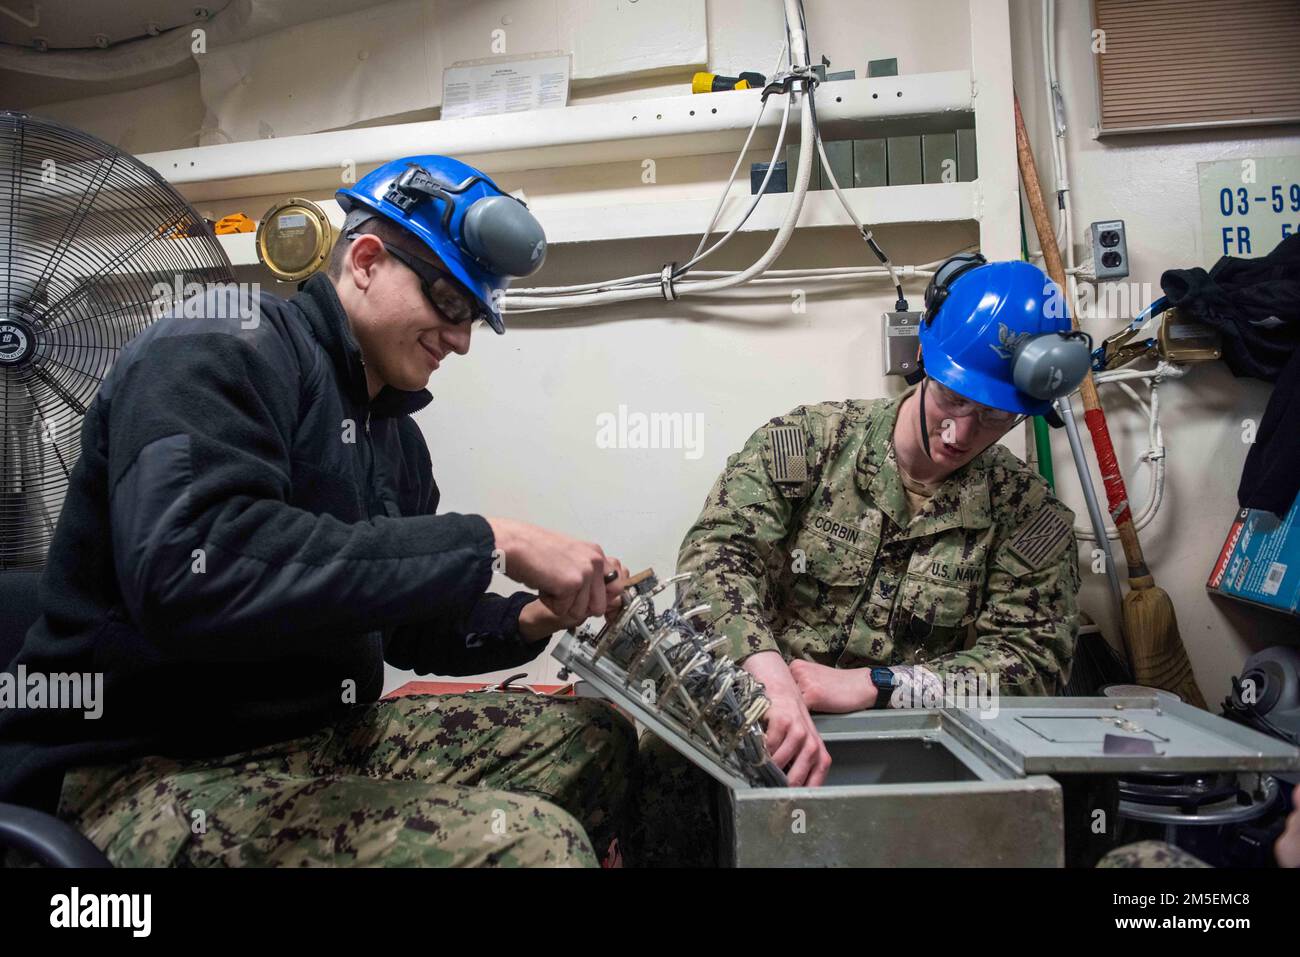 Interior Communications Electrician Seaman Nicholas Holmes, left, from Easton, Pennsylvania, and Interior Communications Electrician 3rd Class Jonathan Corbin, from Huntsville, Alabama, perform maintenance on a patch panel aboard the aircraft carrier USS John C. Stennis (CVN 74), in Newport News, Virginia, March 8, 2022. The John C. Stennis is in Newport News Shipyard  working alongside NNS, NAVSEA and contractors conducting Refueling and Complex Overhaul as part of the mission to deliver the warship back in the fight, on time and on budget, to resume its duty of defending the United States. Stock Photo